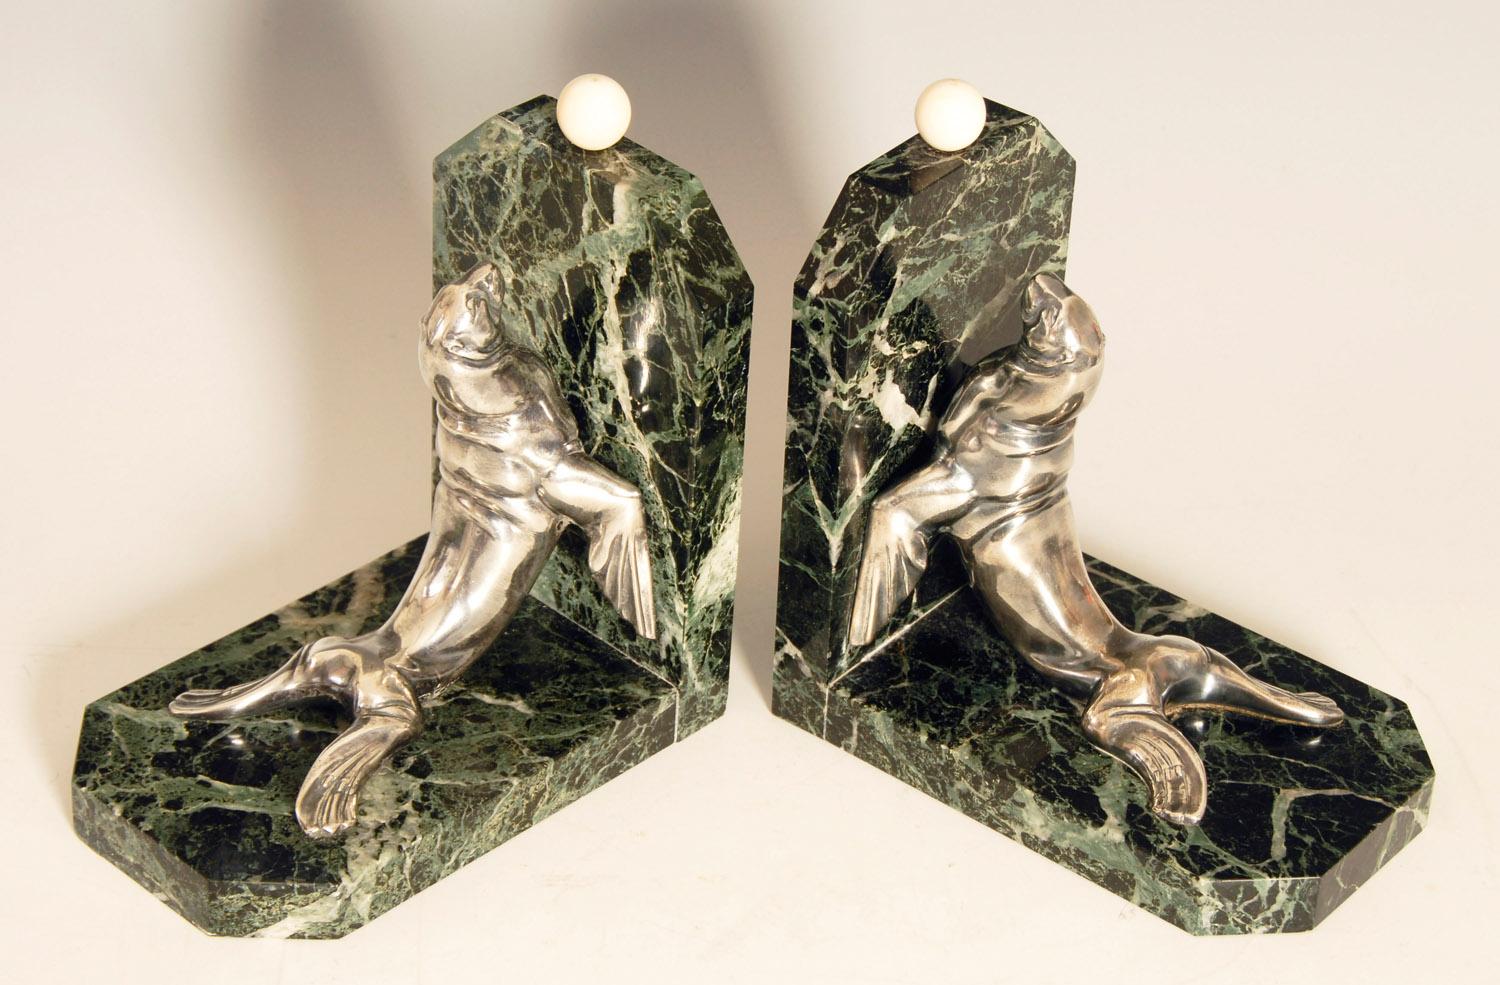 Large, heavy pair of Art Deco bookends by Maurice Frecourt, featuring silvered bronze sea lions / seals on green veined marble.
Weighing in at around 5.5 lbs each, these are very substantial bookends.

Price includes free shipping to anywhere in